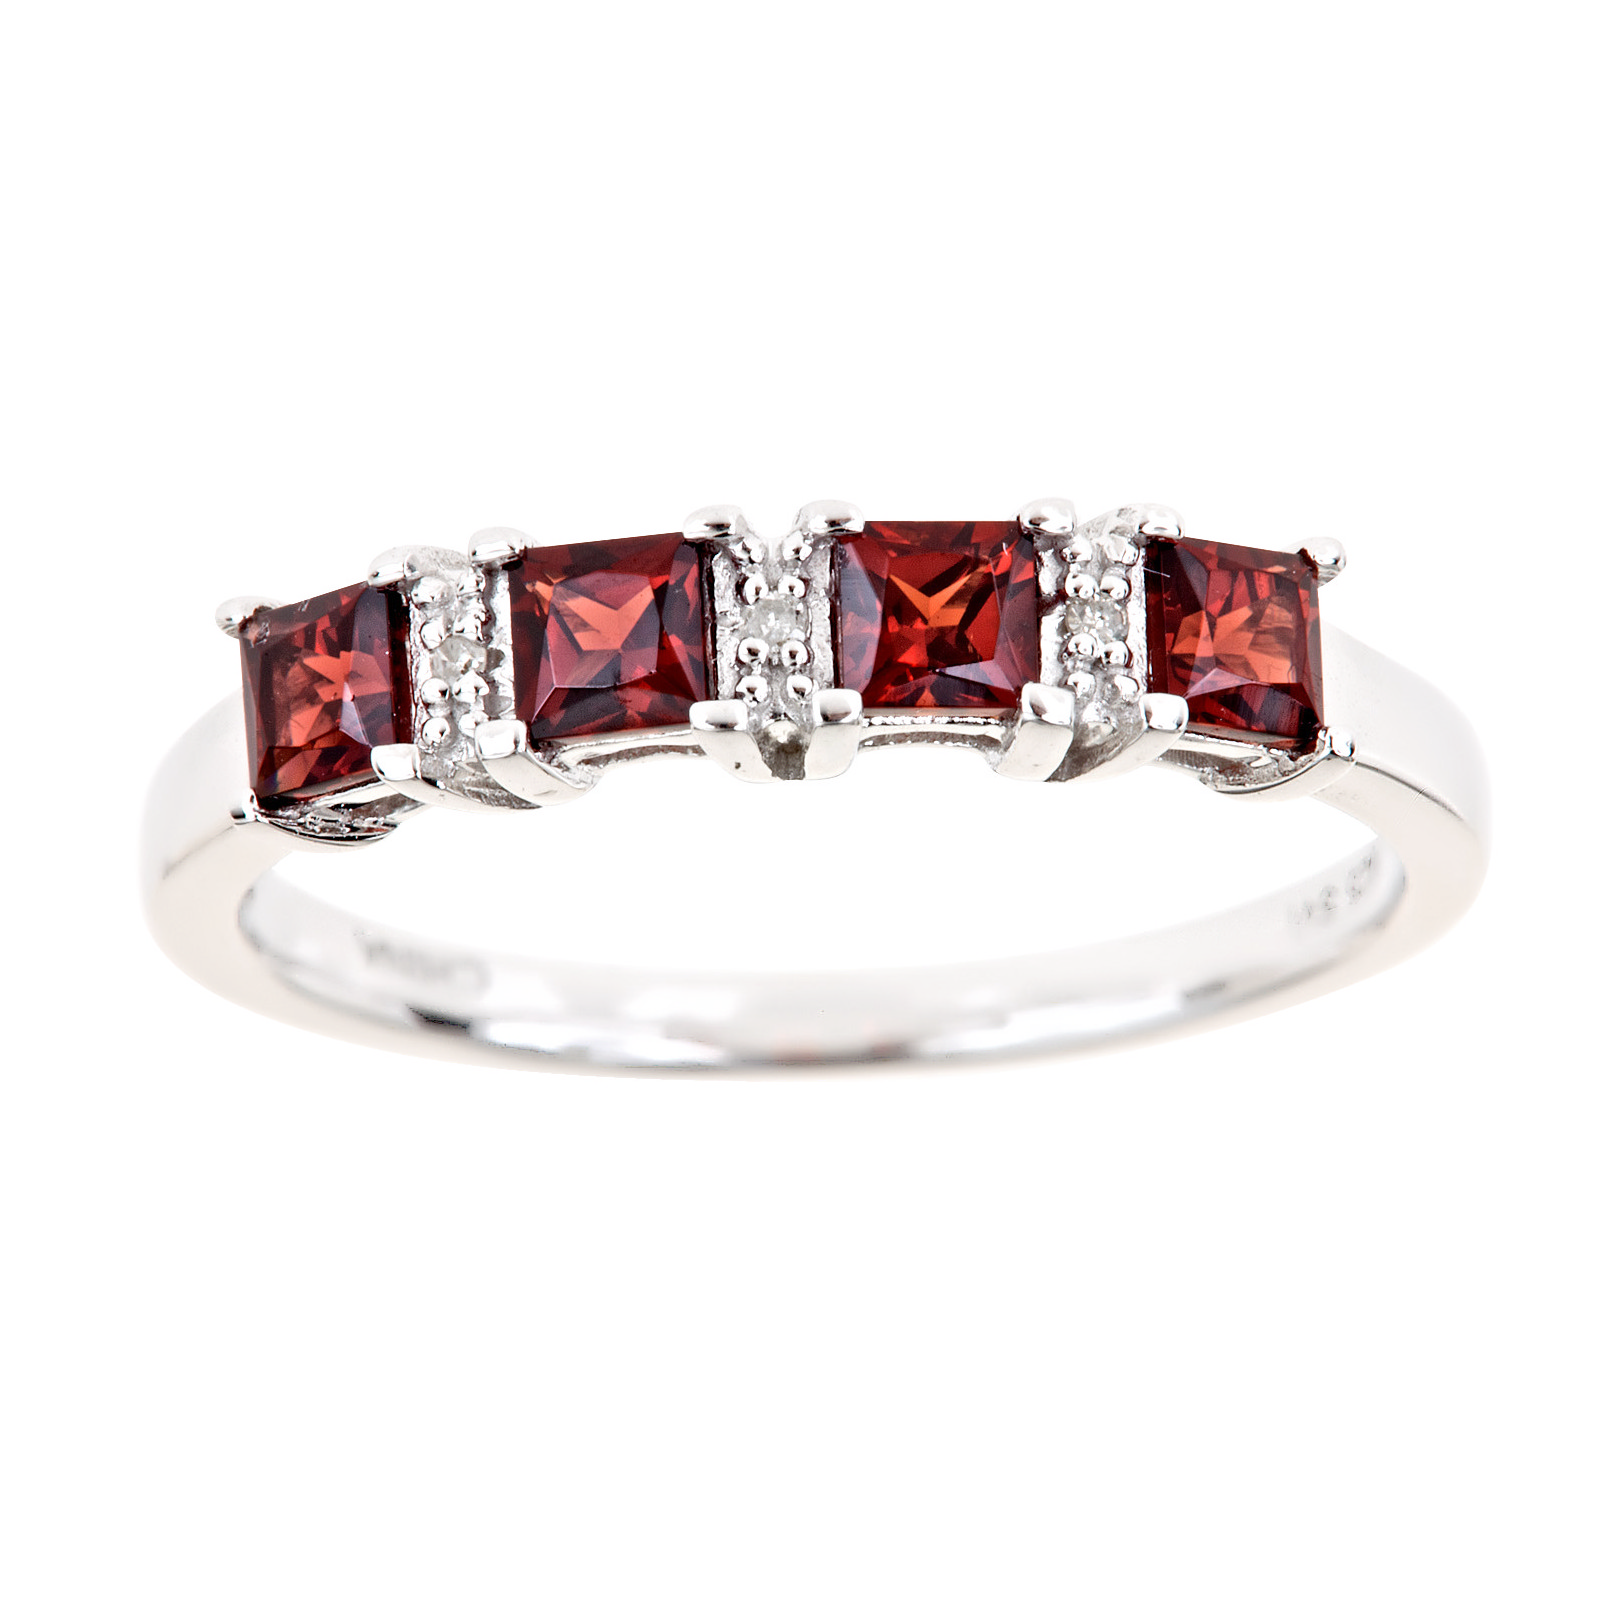 Ladies Sterling Silver 4 Stone Garnet and Diamond Accent Ring